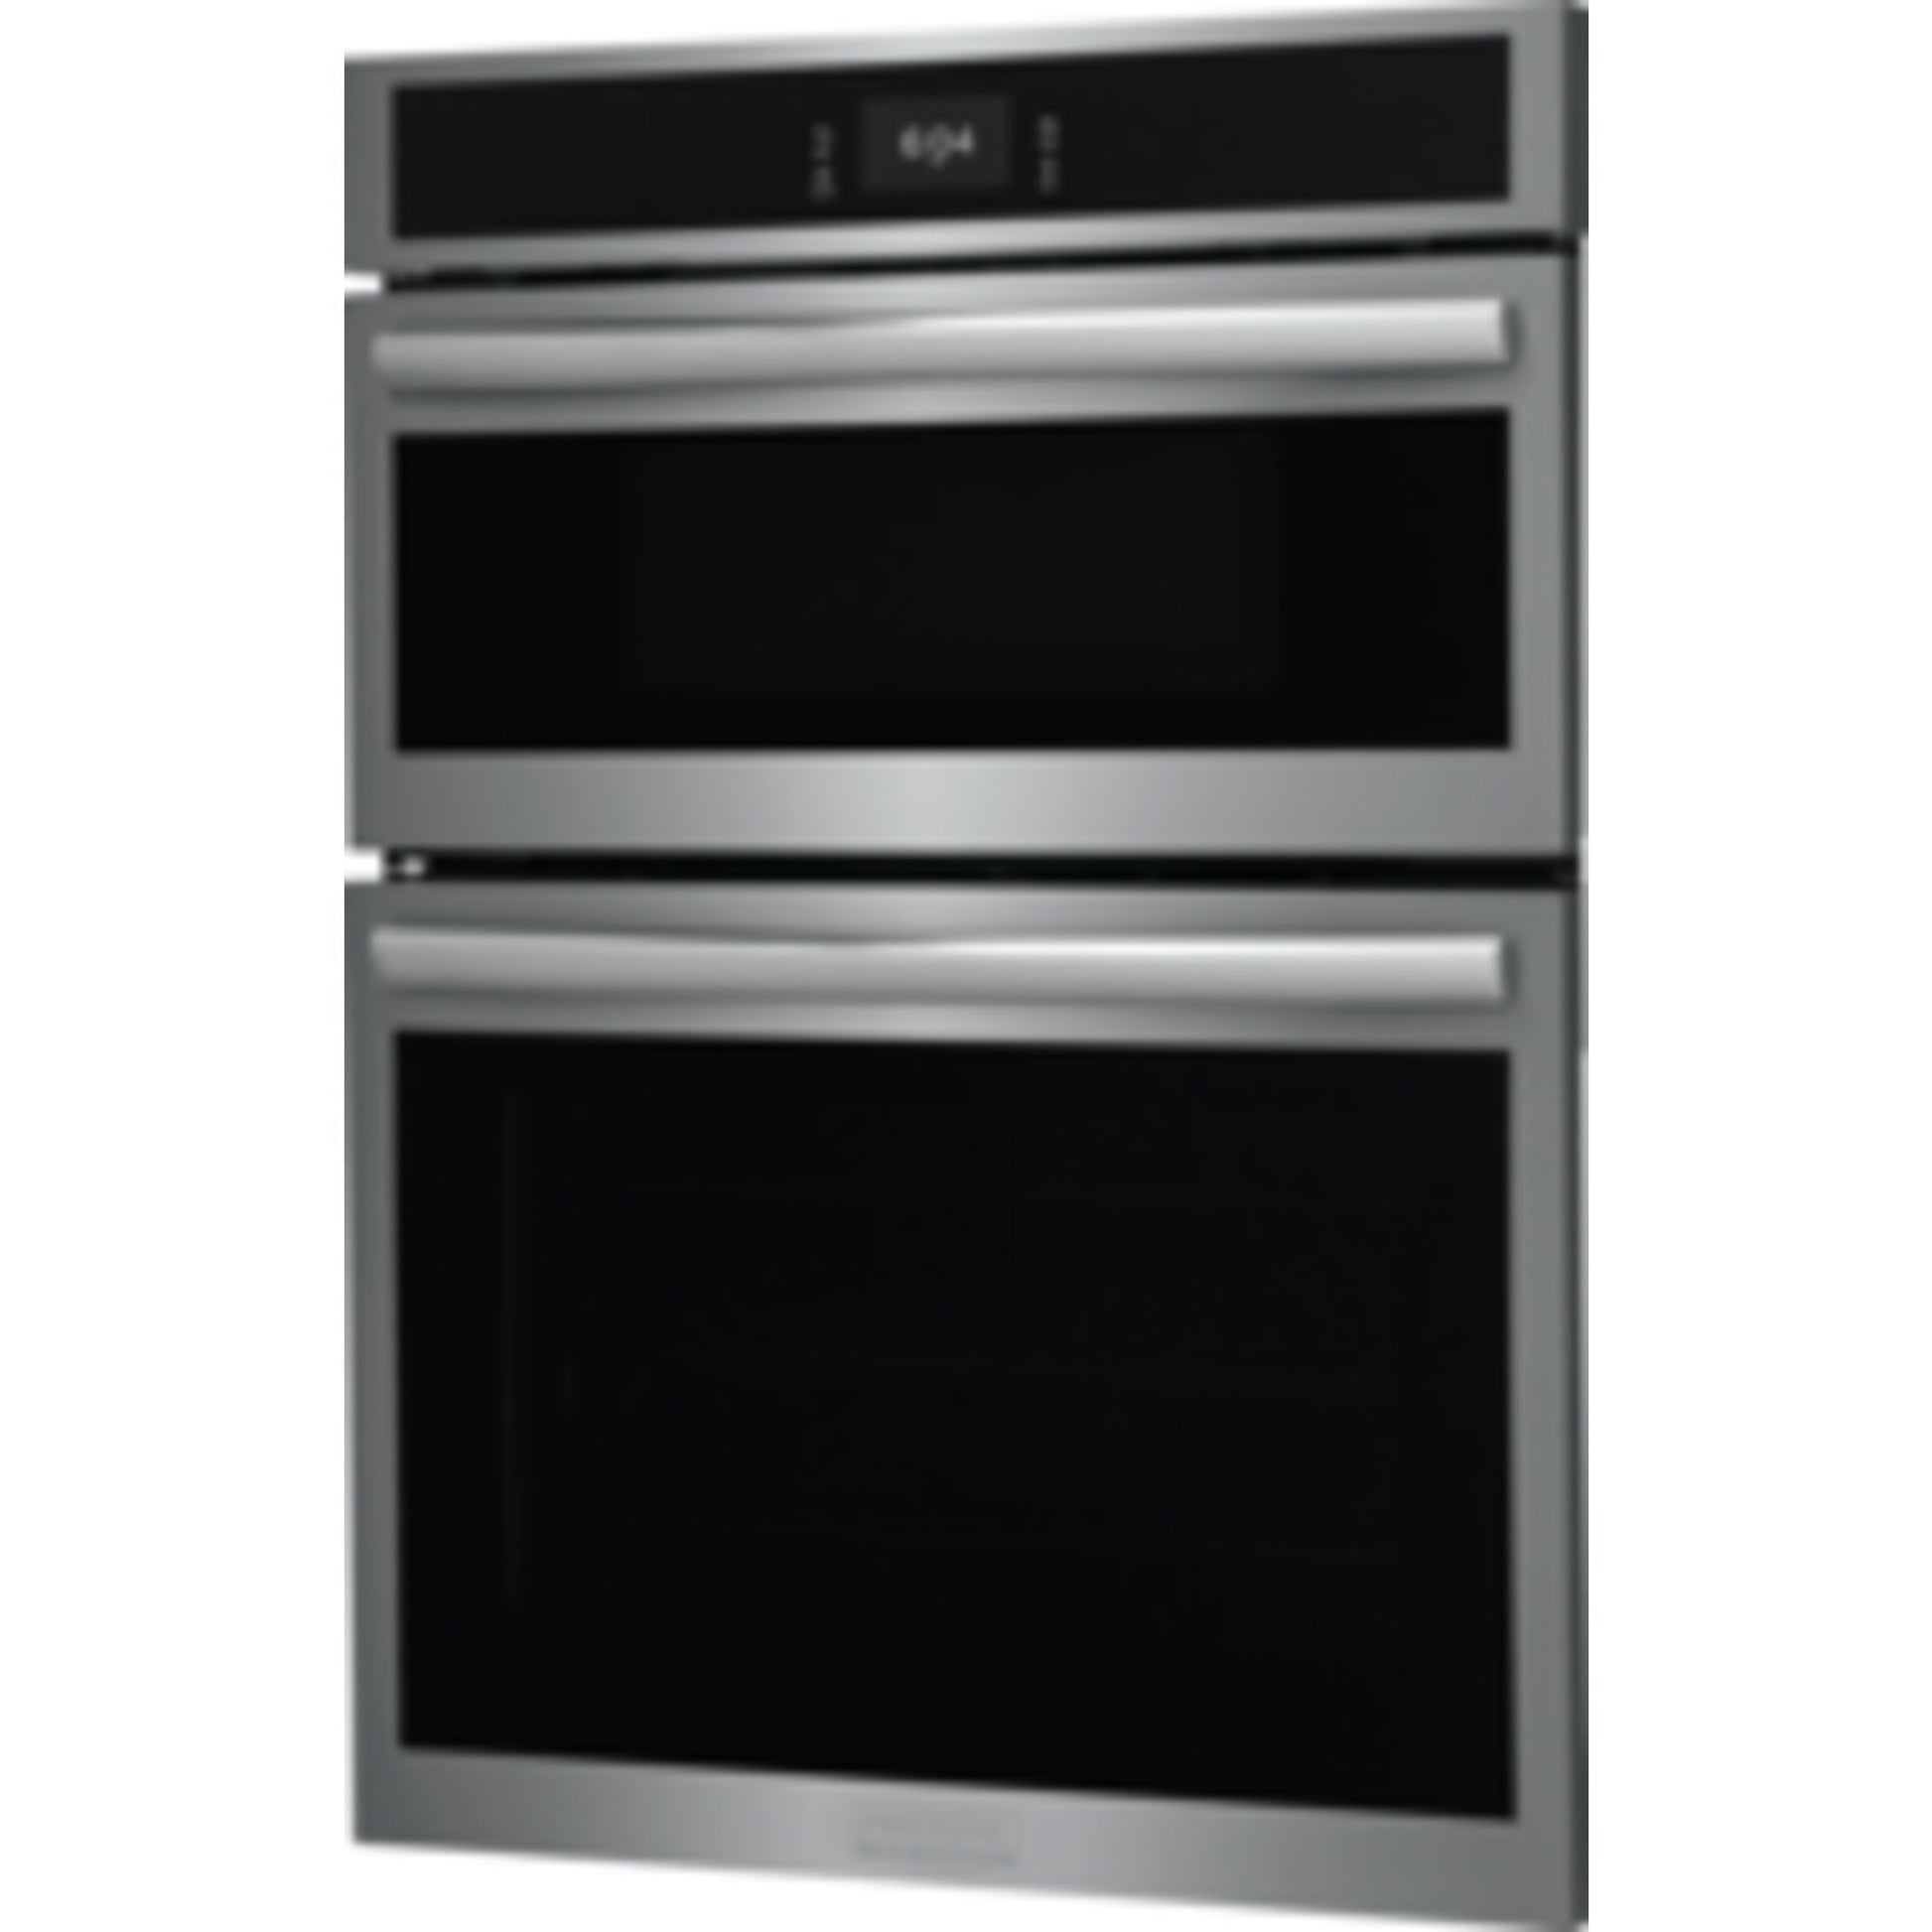 Frigidaire Gallery 30" Microwave/Wall Oven (GCWM3067AF) - Stainless, SmudgeProof